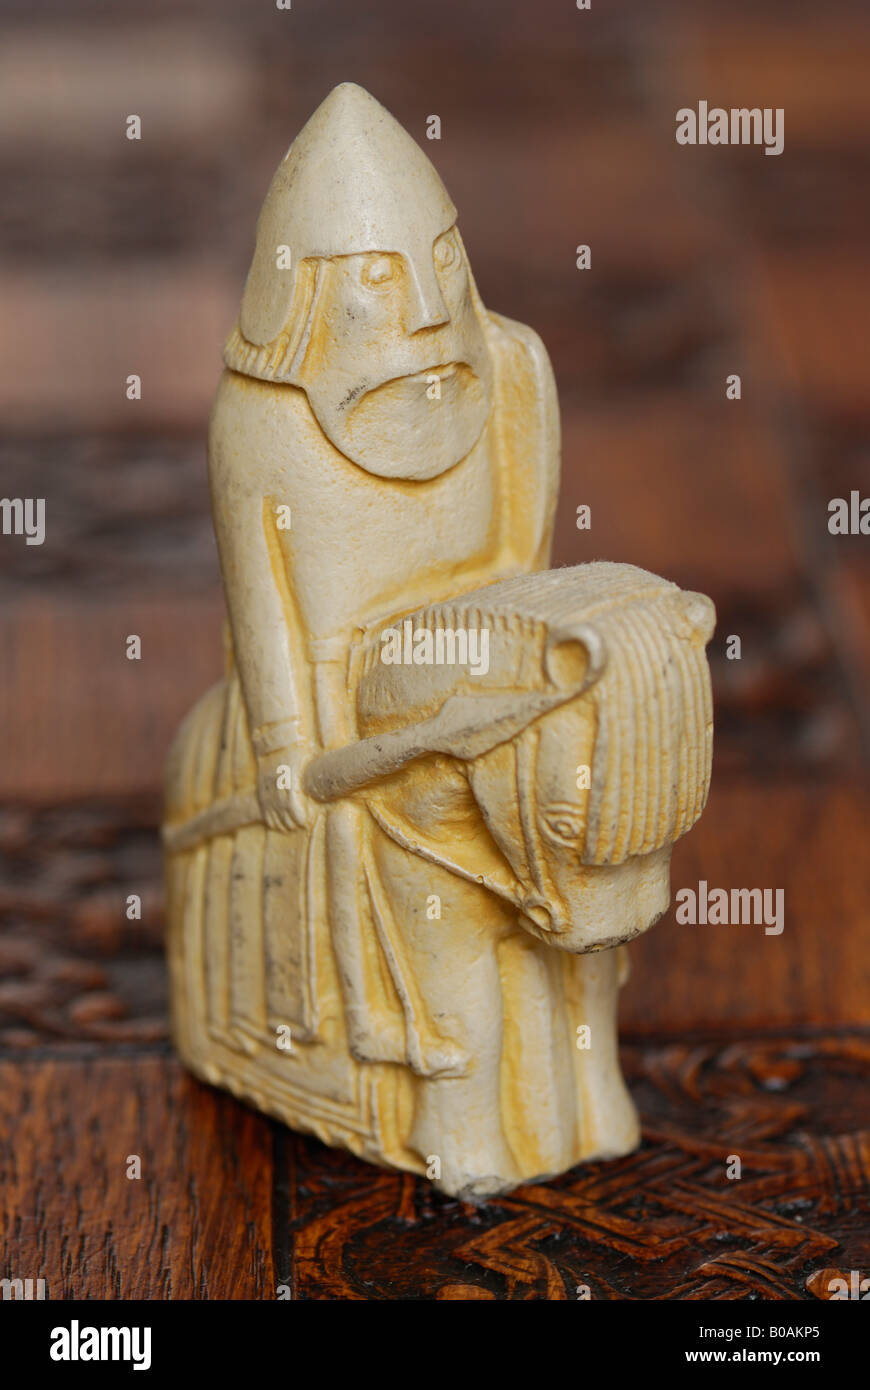 Knight from a replica Lewis Chessmen set Stock Photo: 17445405 - Alamy